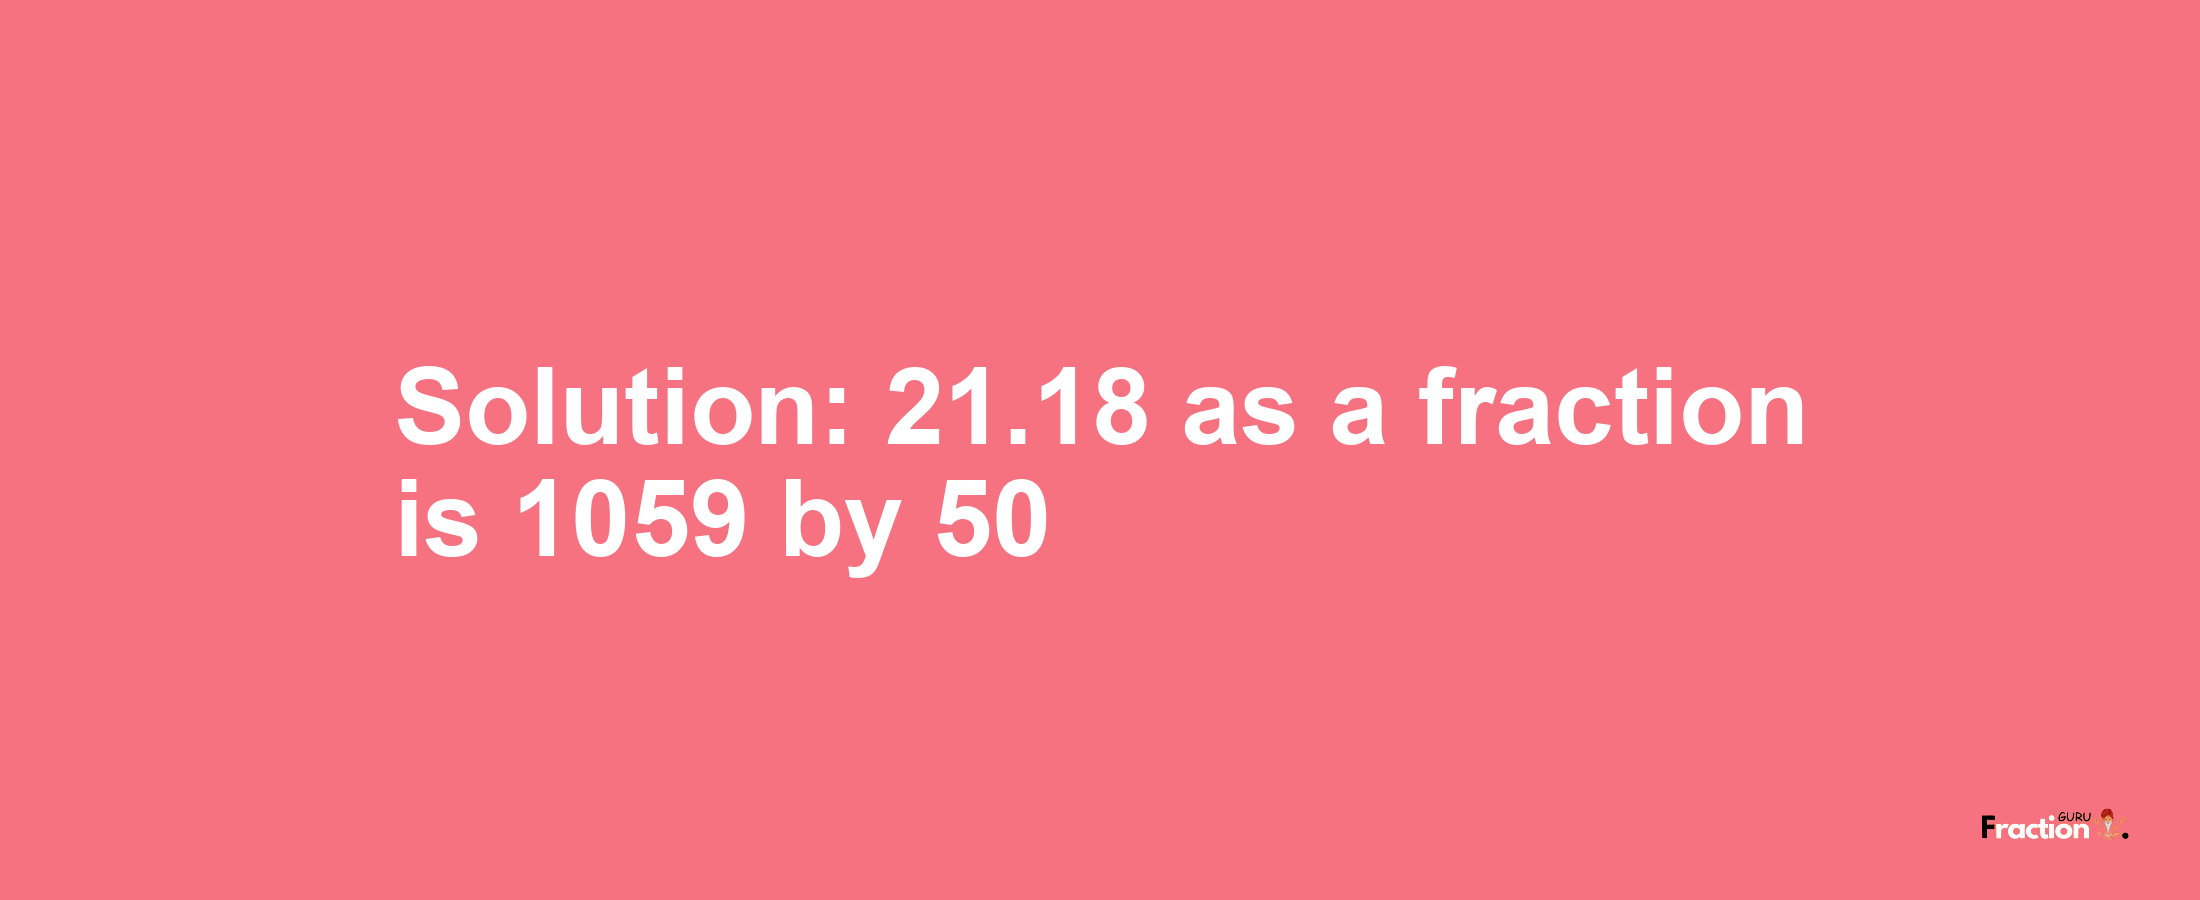 Solution:21.18 as a fraction is 1059/50